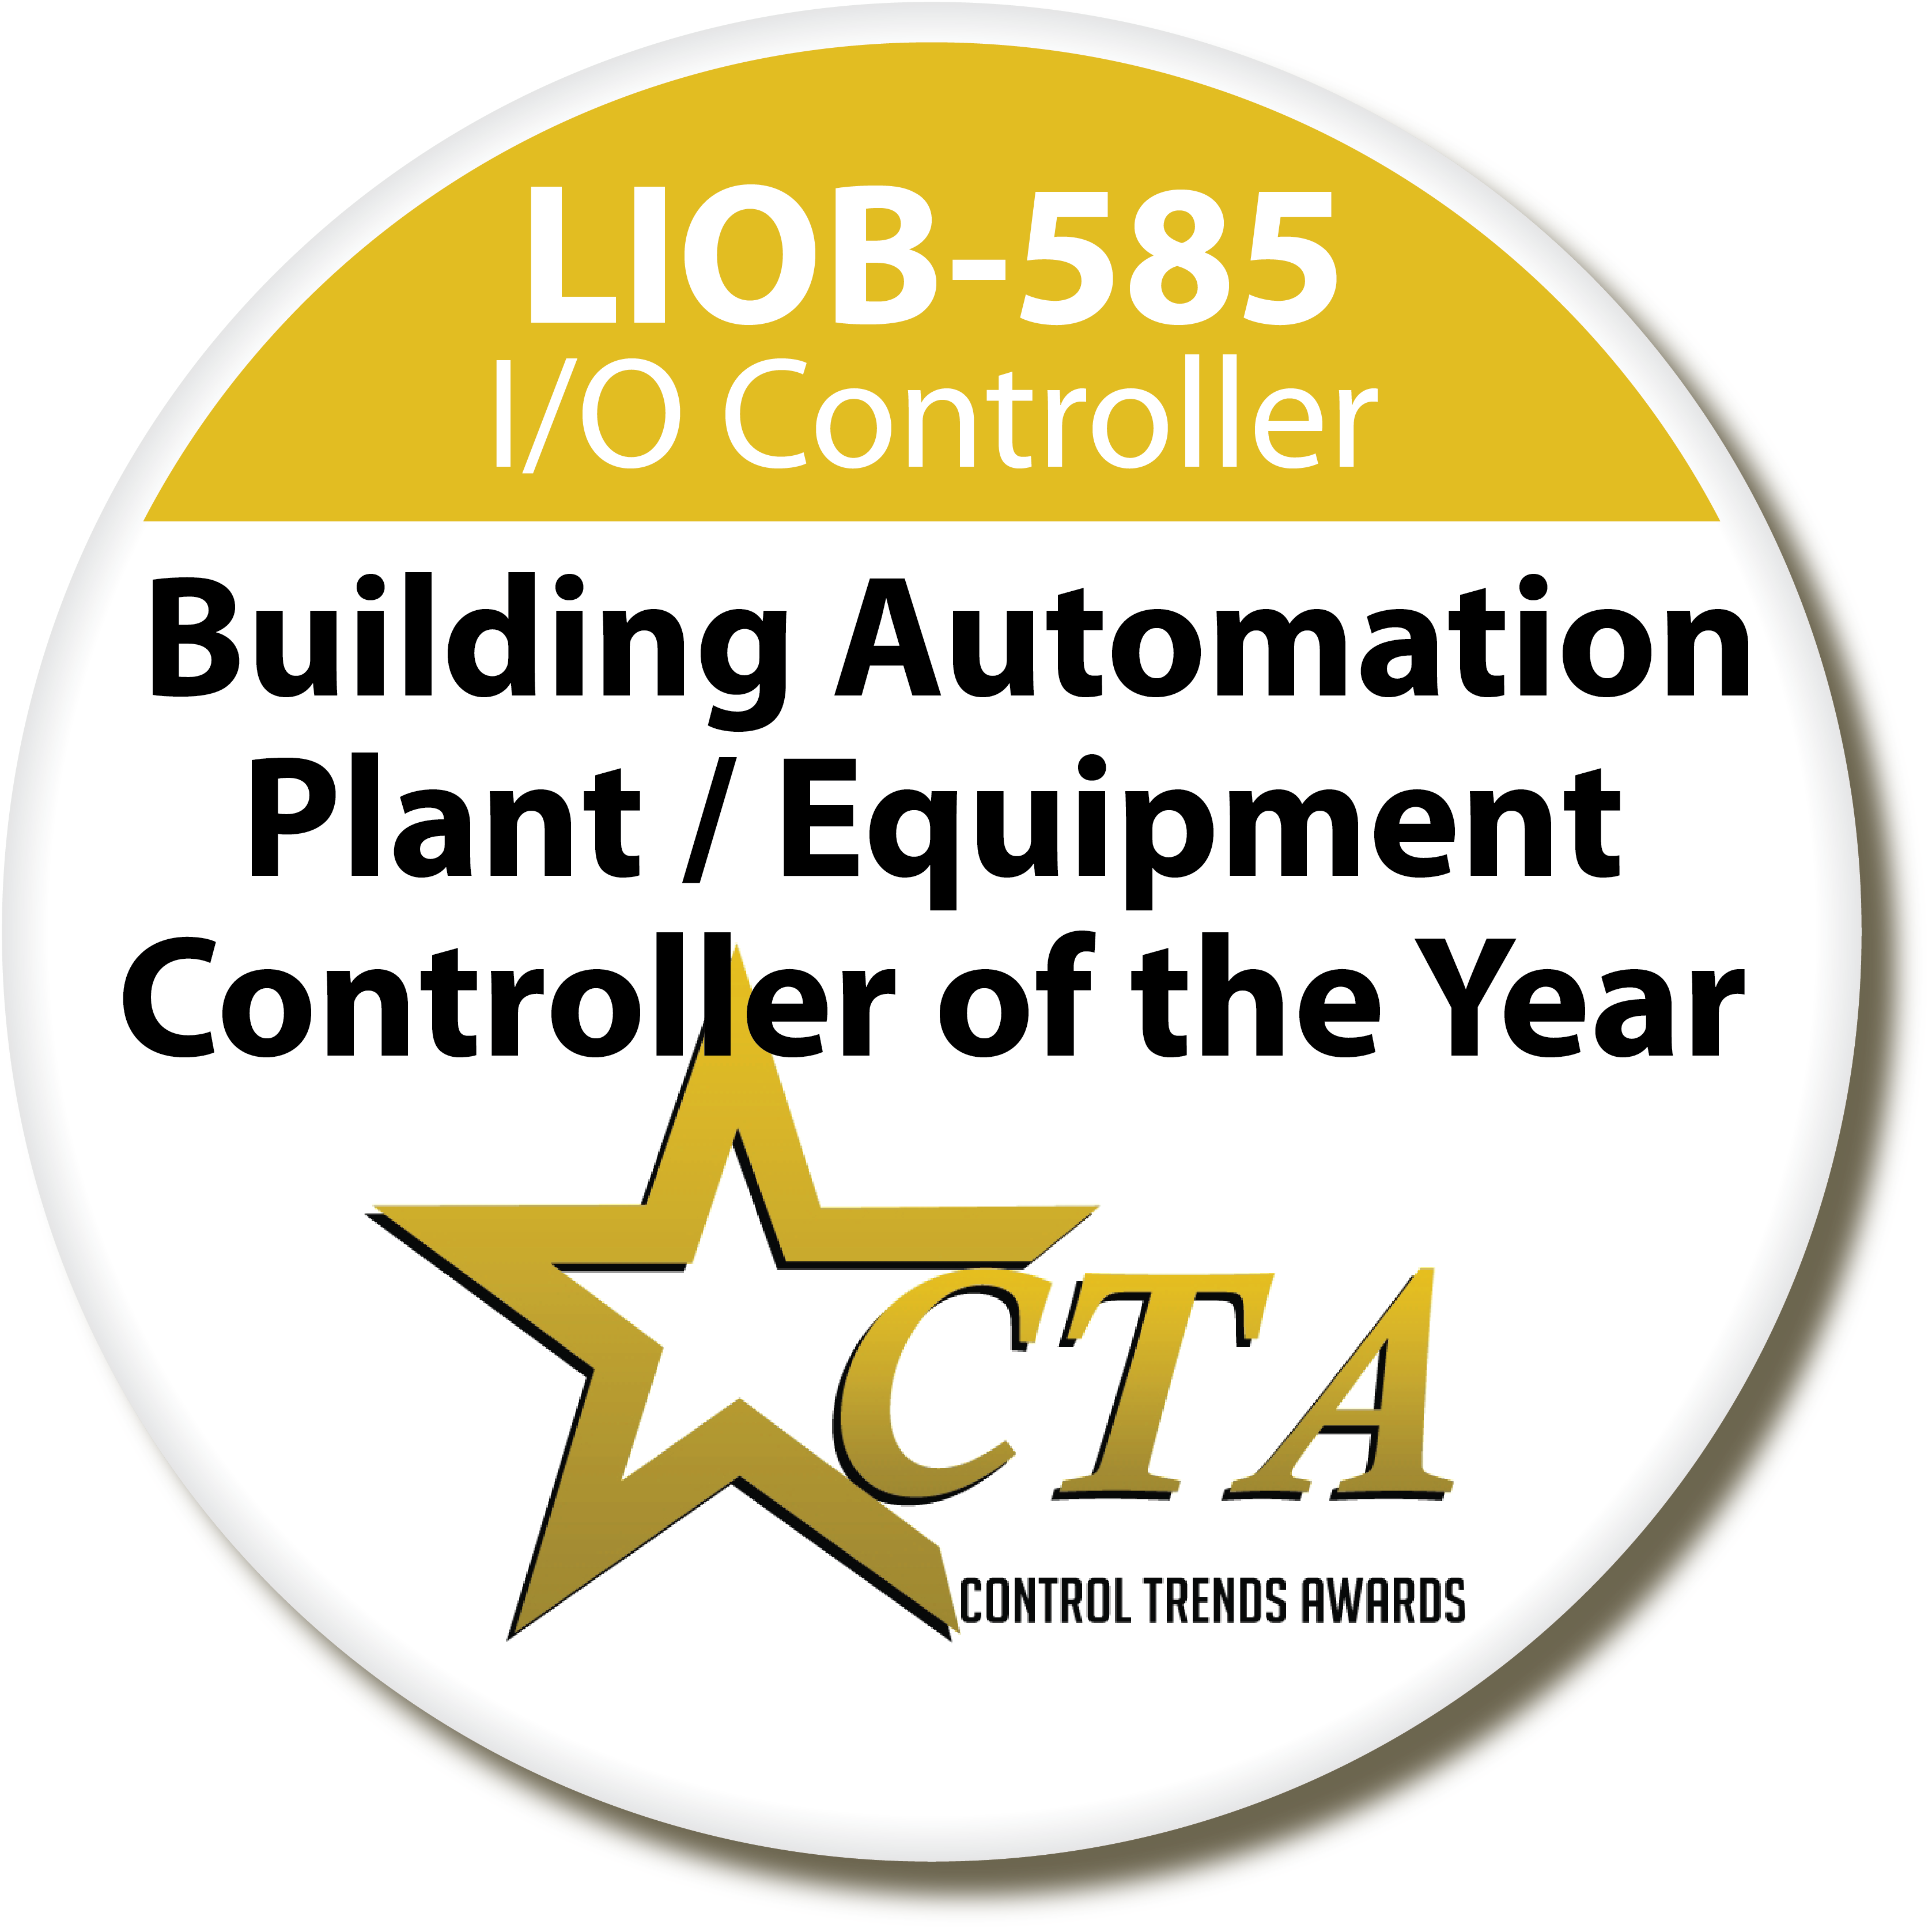 Control Trends Awards - Building Automation Plant / Equipment Controller of the Year